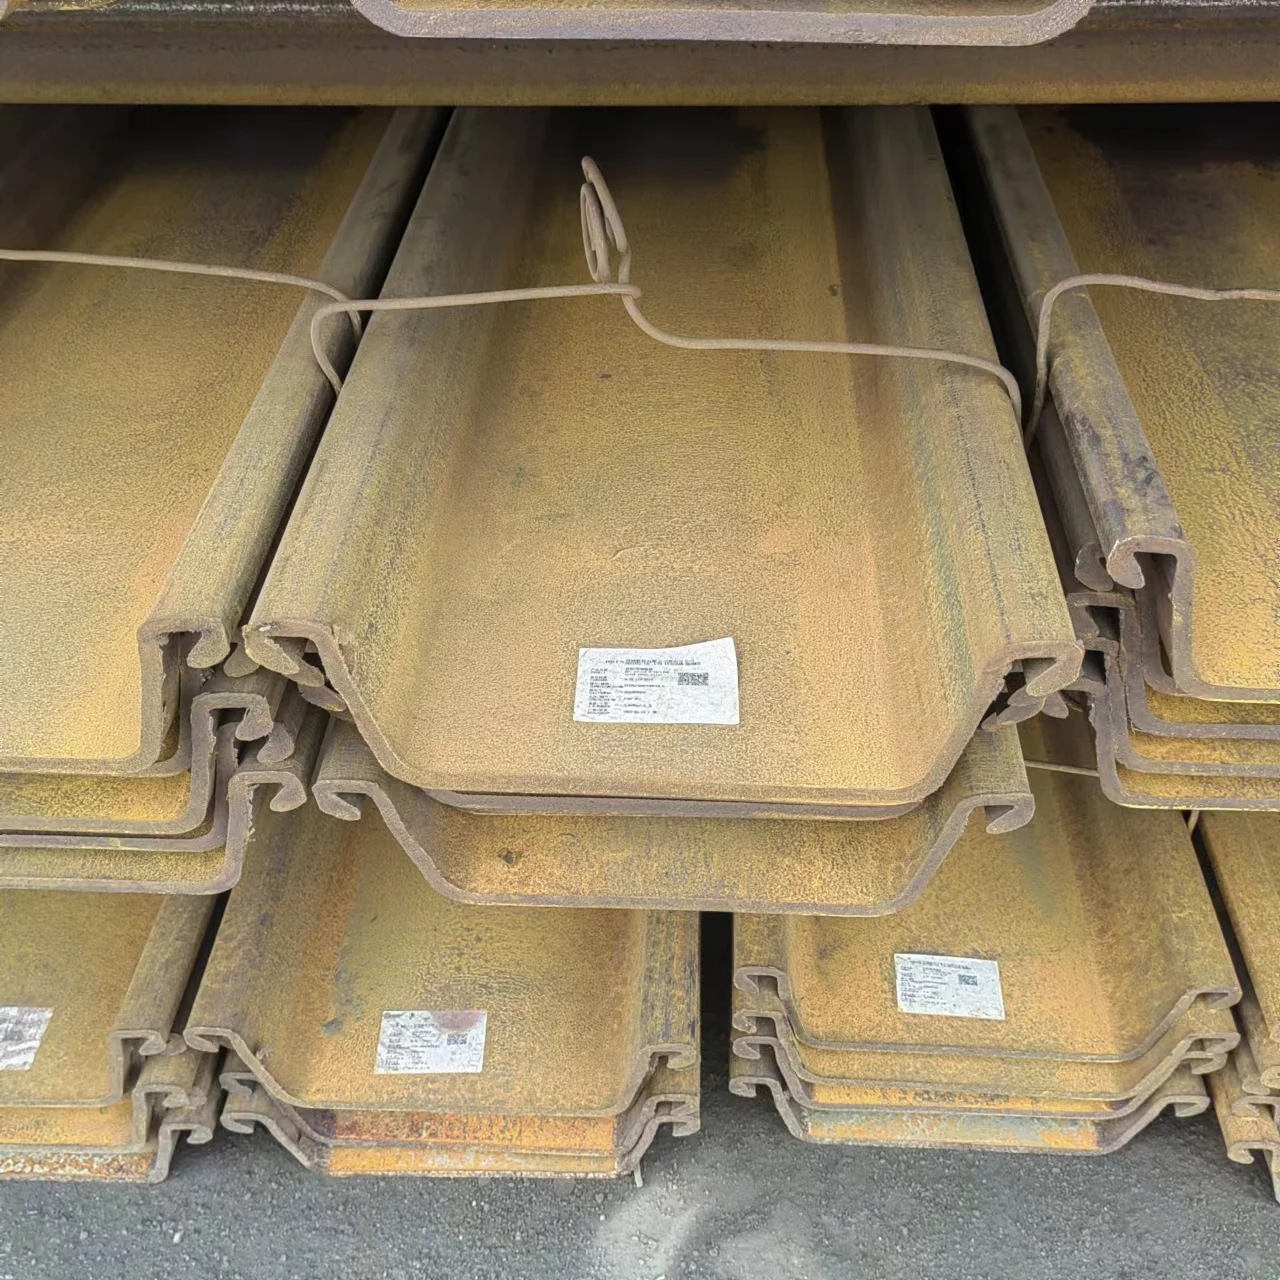 6m/9m/12m Hot Rolled Steel Sheet Piles